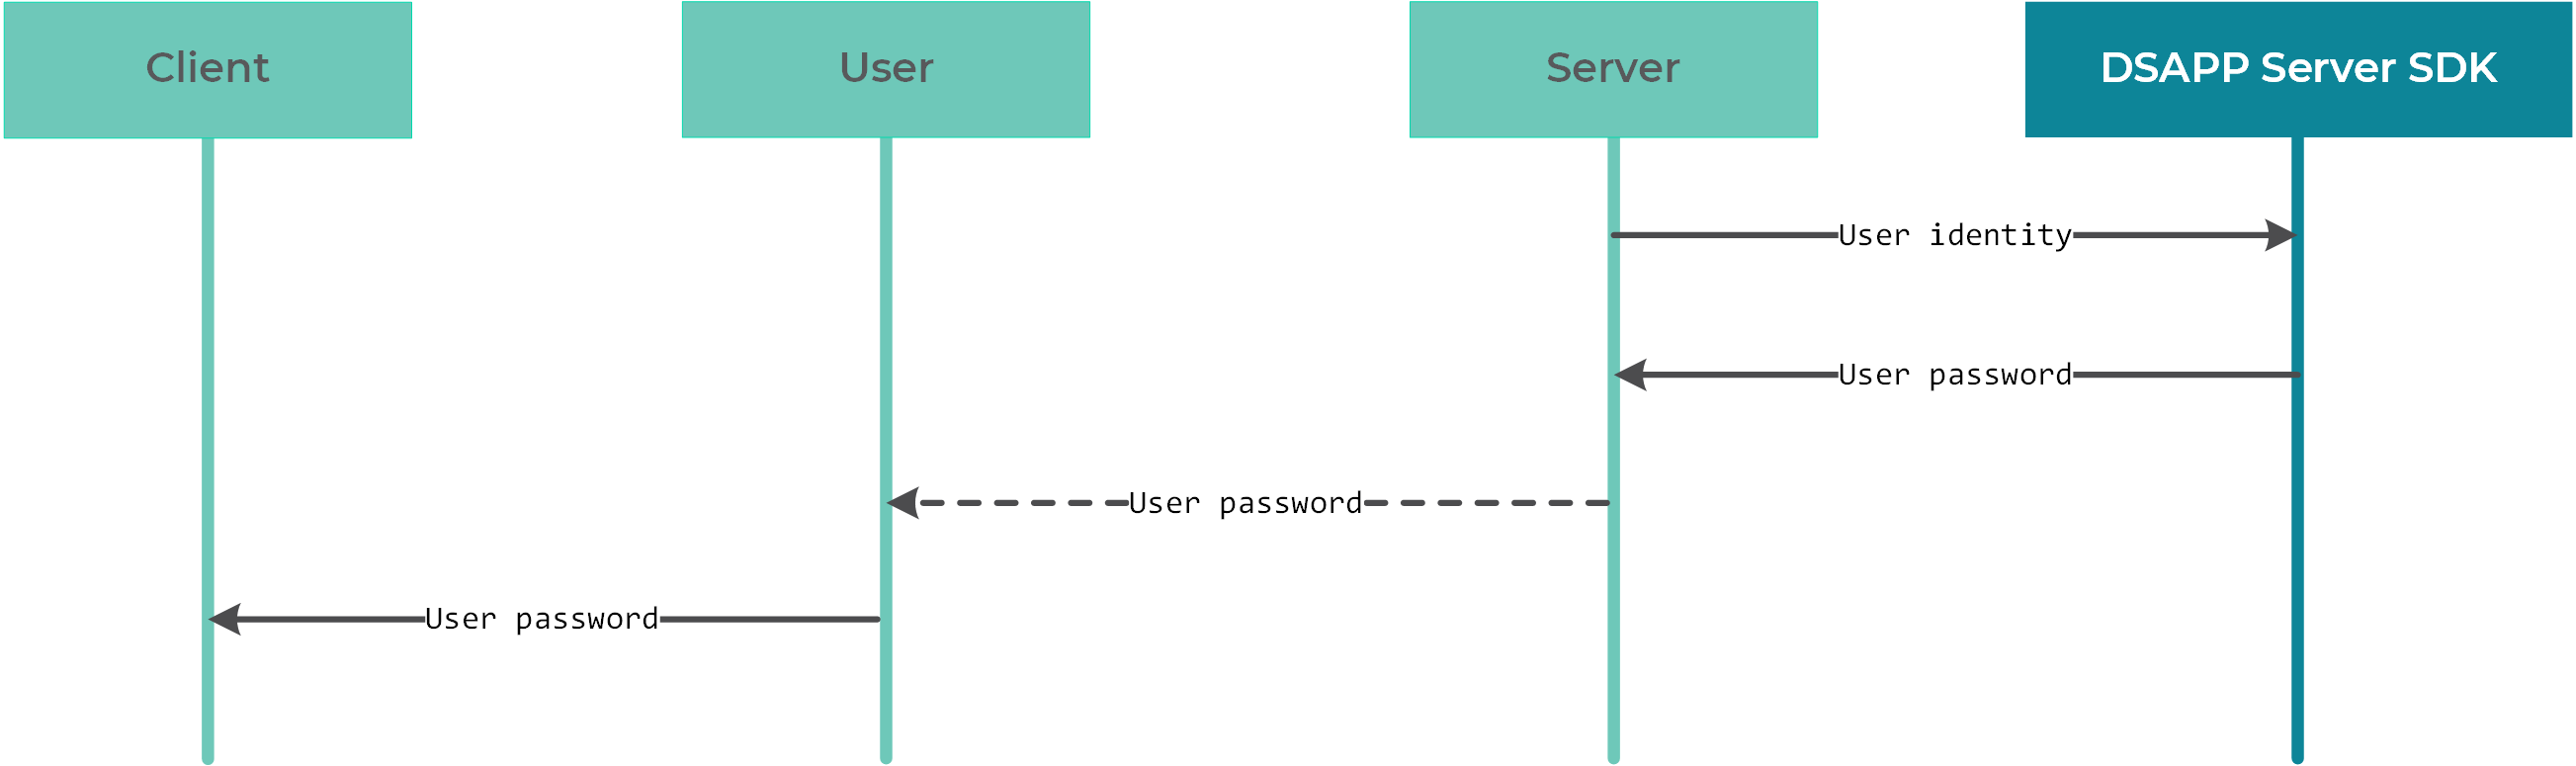 Overview of user password transmission with DSAPP